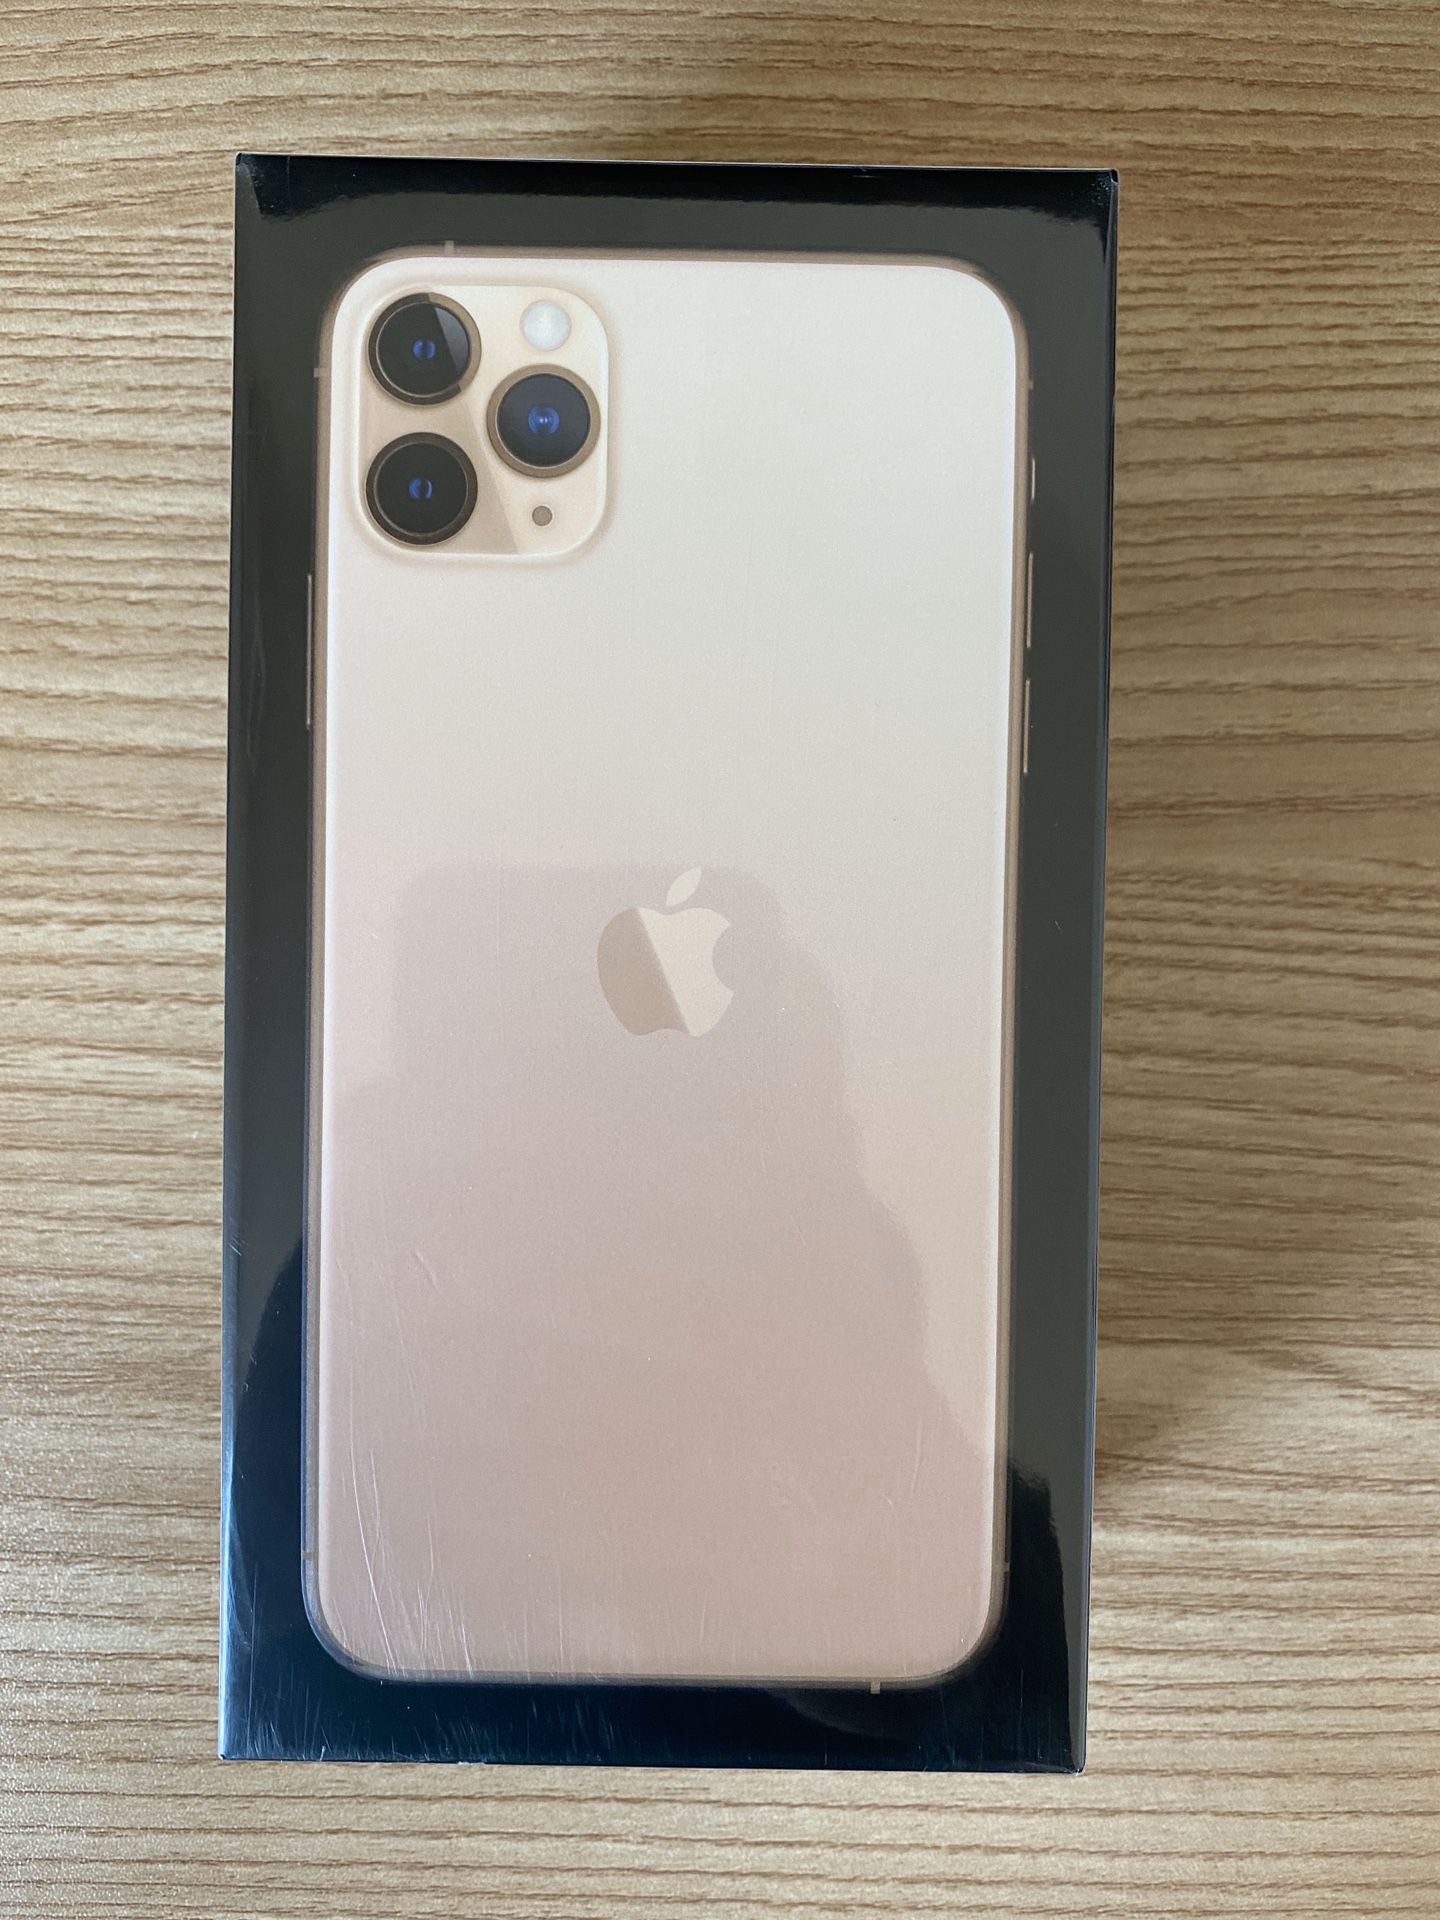 iPhone 11 pro max 256gb Verizon Only✅Brand New Sealed Price Firm✅